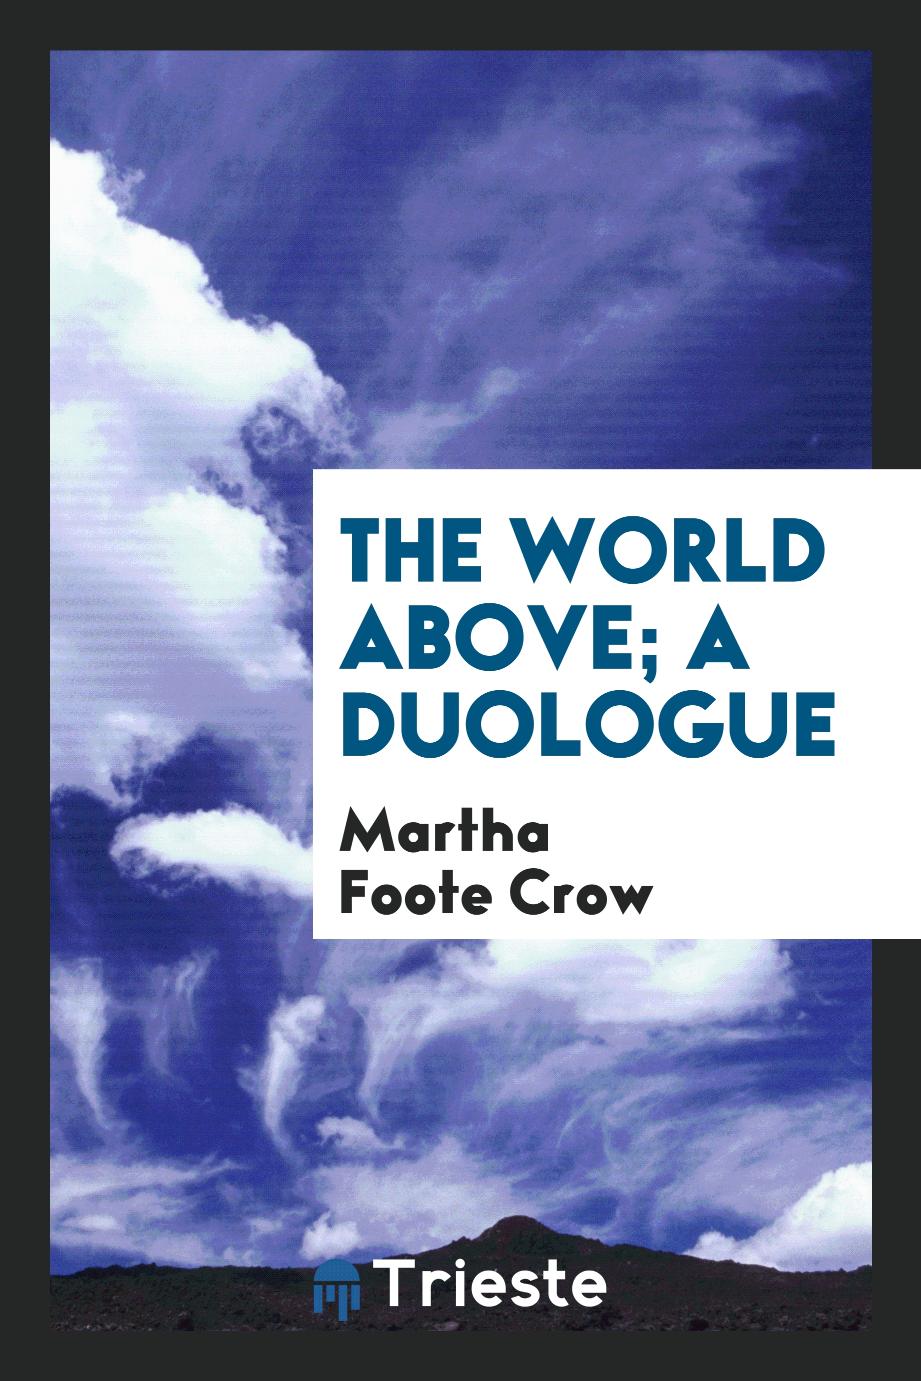 The world above; a duologue